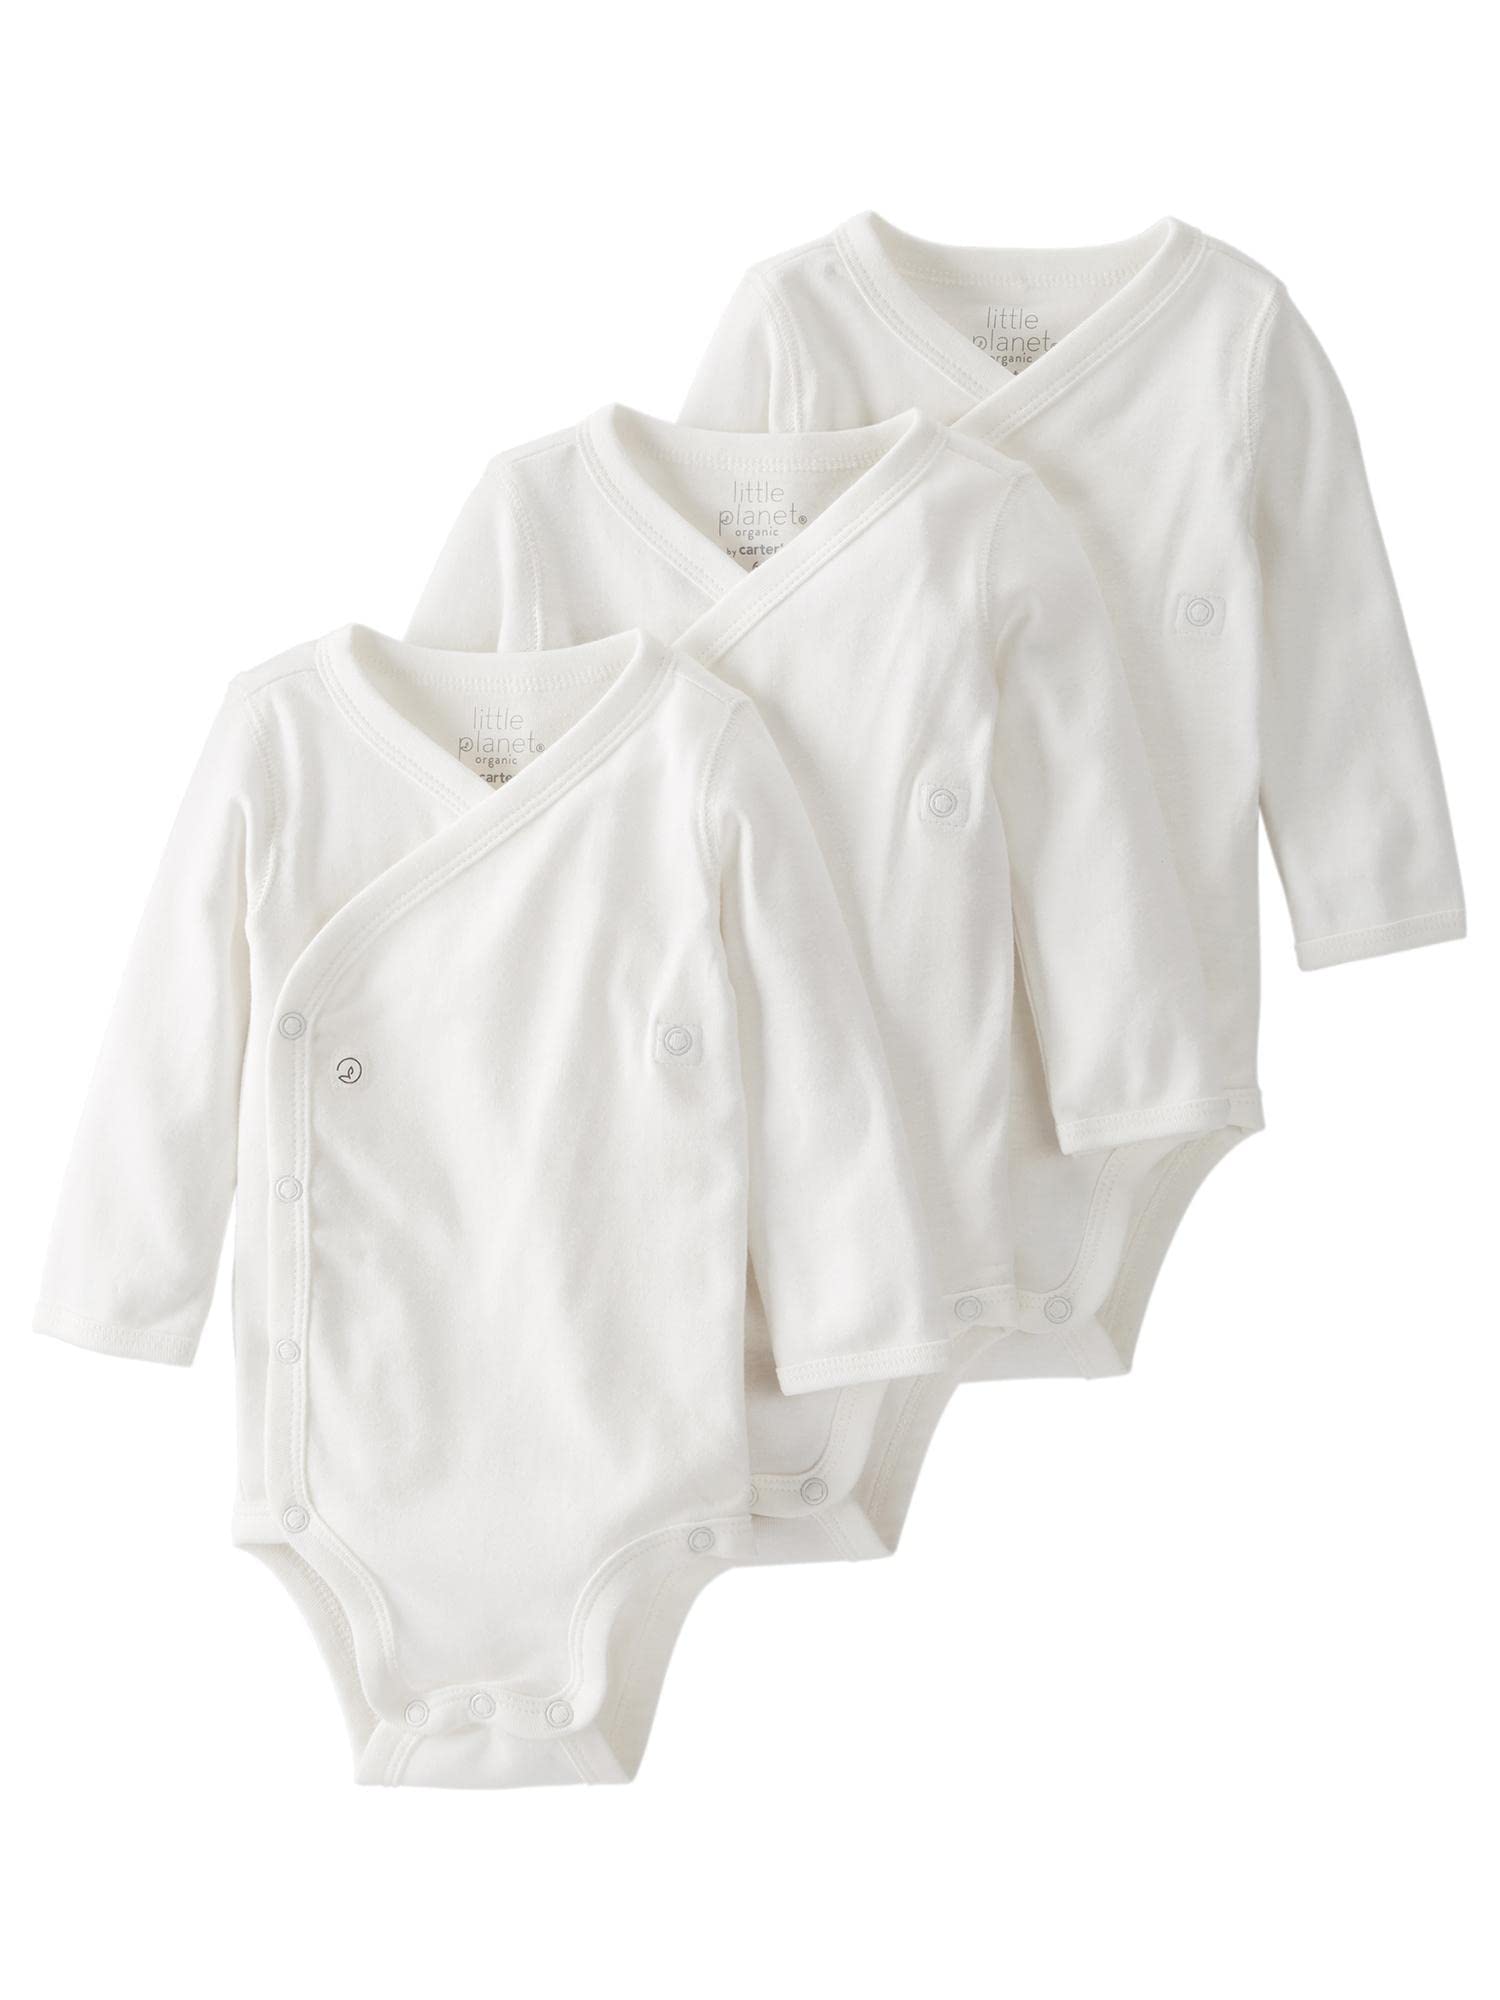 Little Planet By Carter's Baby 3-Pack Organic Cotton Long-Sleeve Rib Wrap Bodysuits